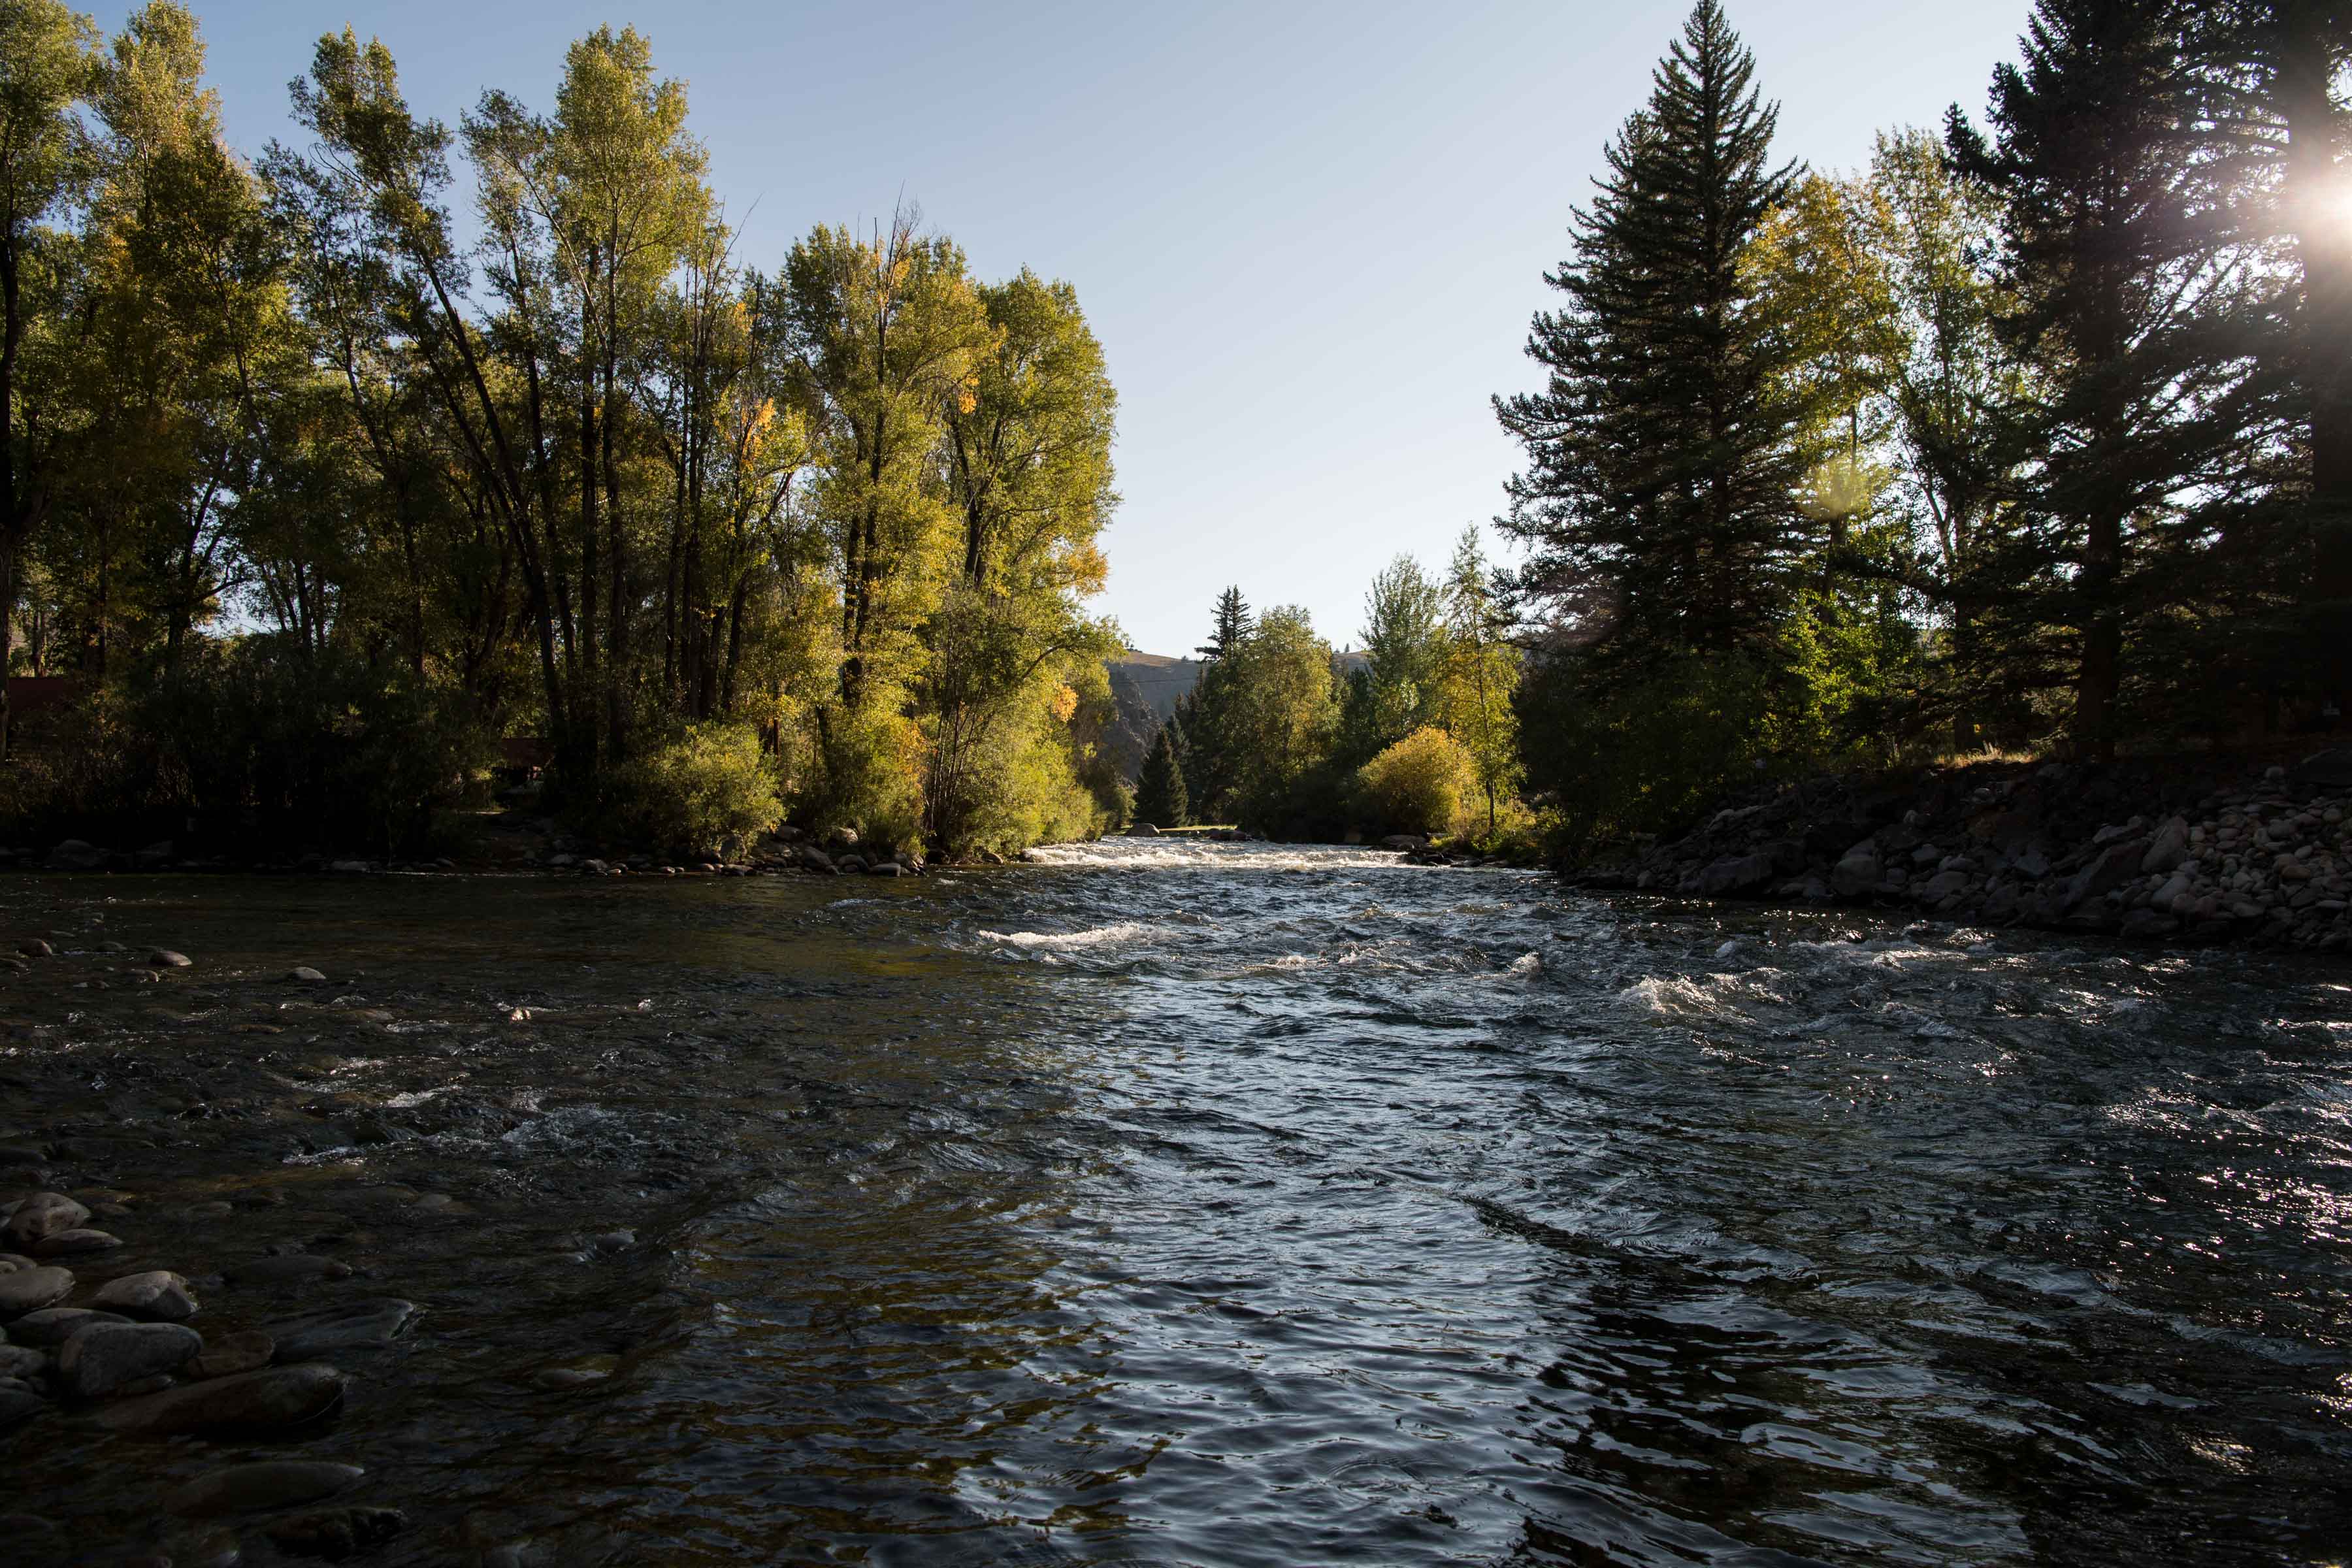 A river running through the forest. Environmental Water Resources Projects is a new funding category under WaterSMART. Projects that benefit plant and animal species, fish and wildlife habitat, riparian areas, and ecosystems directly influenced by water resources management are eligible for this grant opportunity.